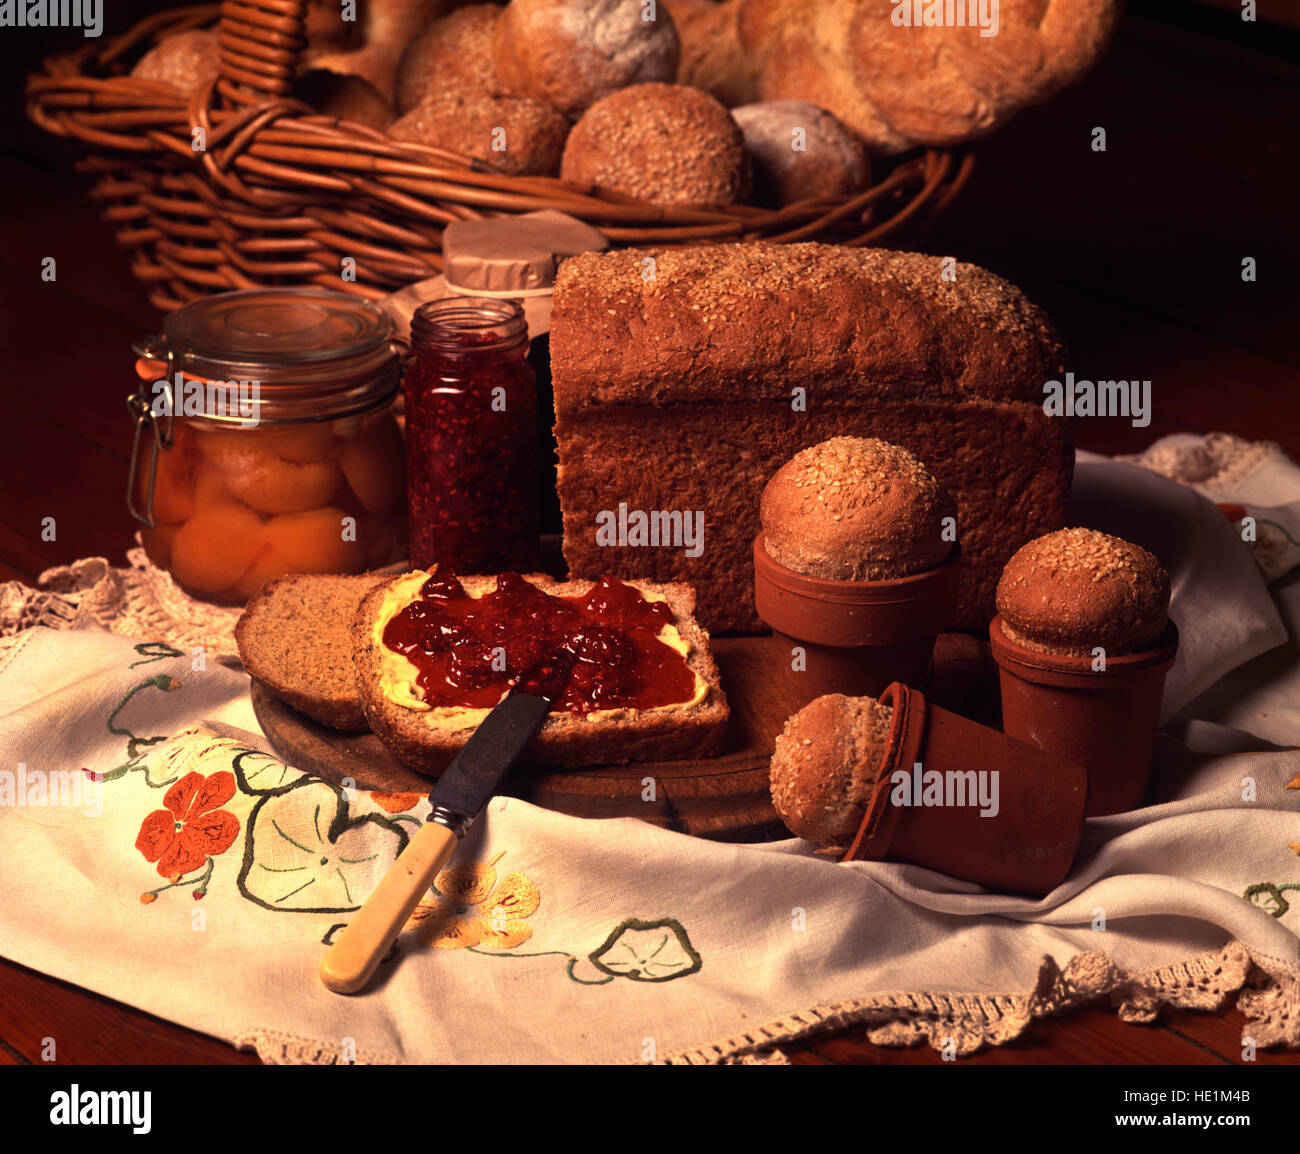 Still life of bread, butter and jam. Stock Photo